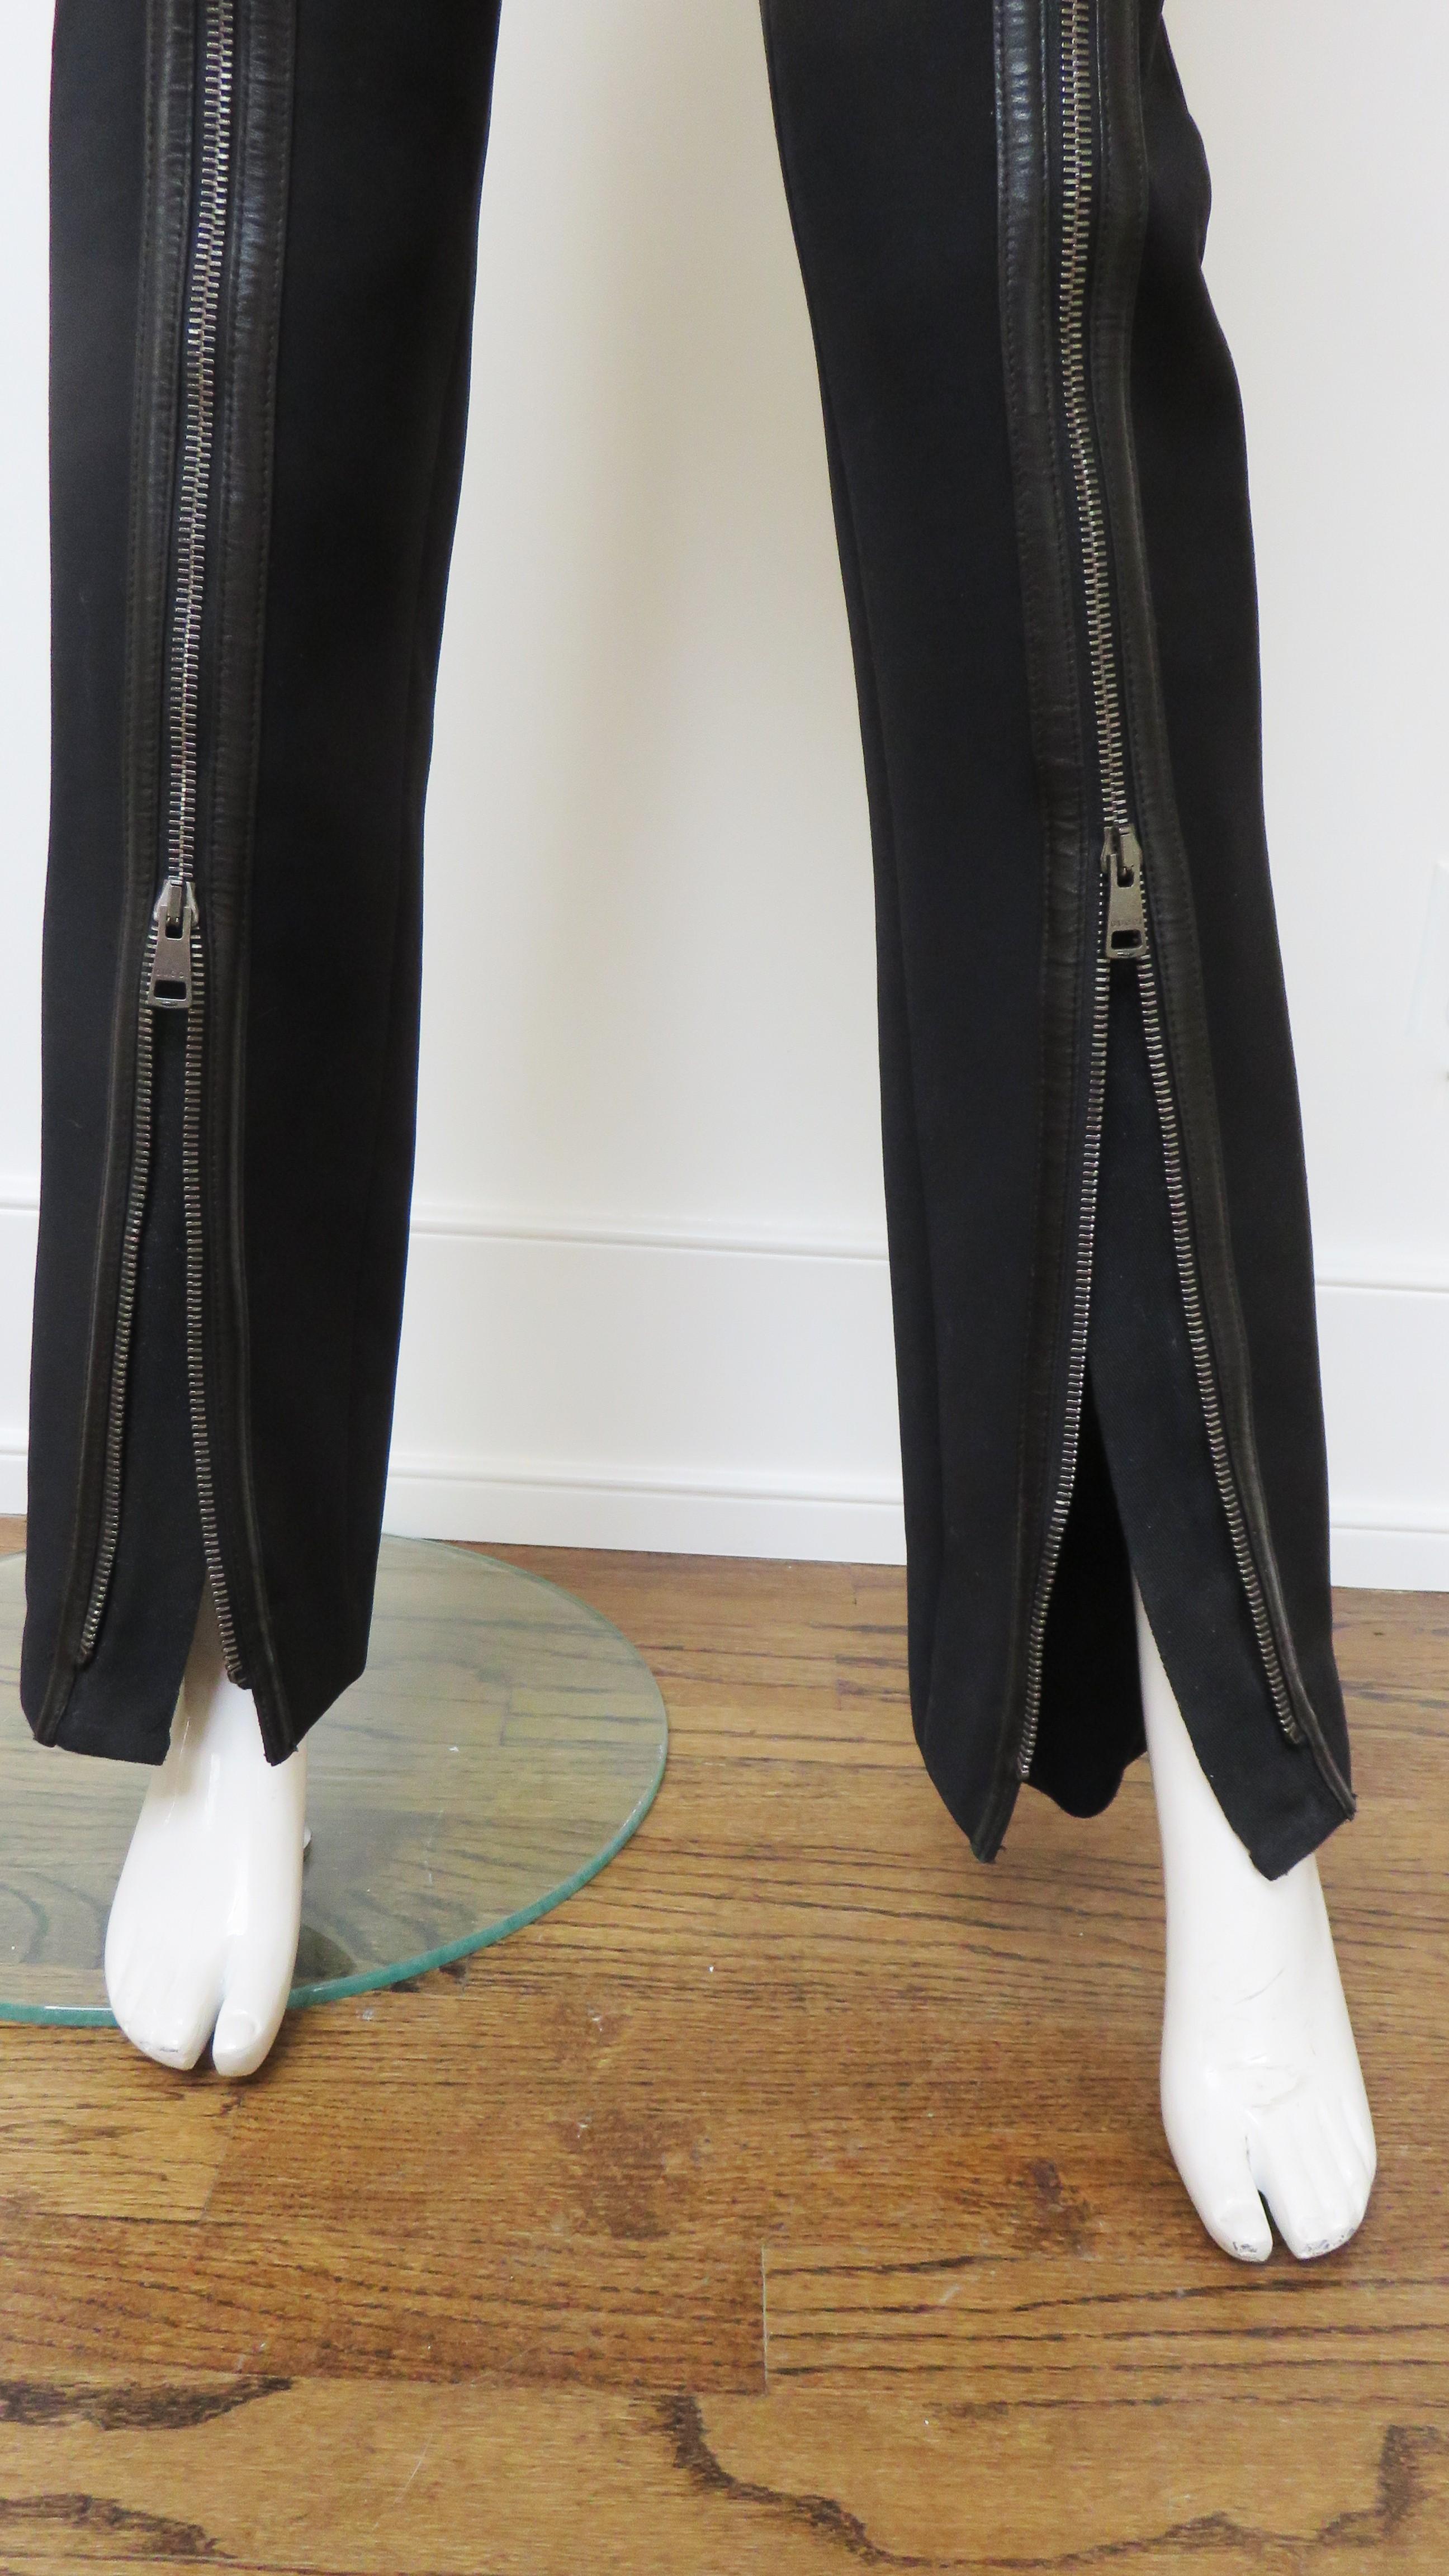 Tom Ford for Gucci Pants with Zipper Legs A/W 2001 For Sale 1